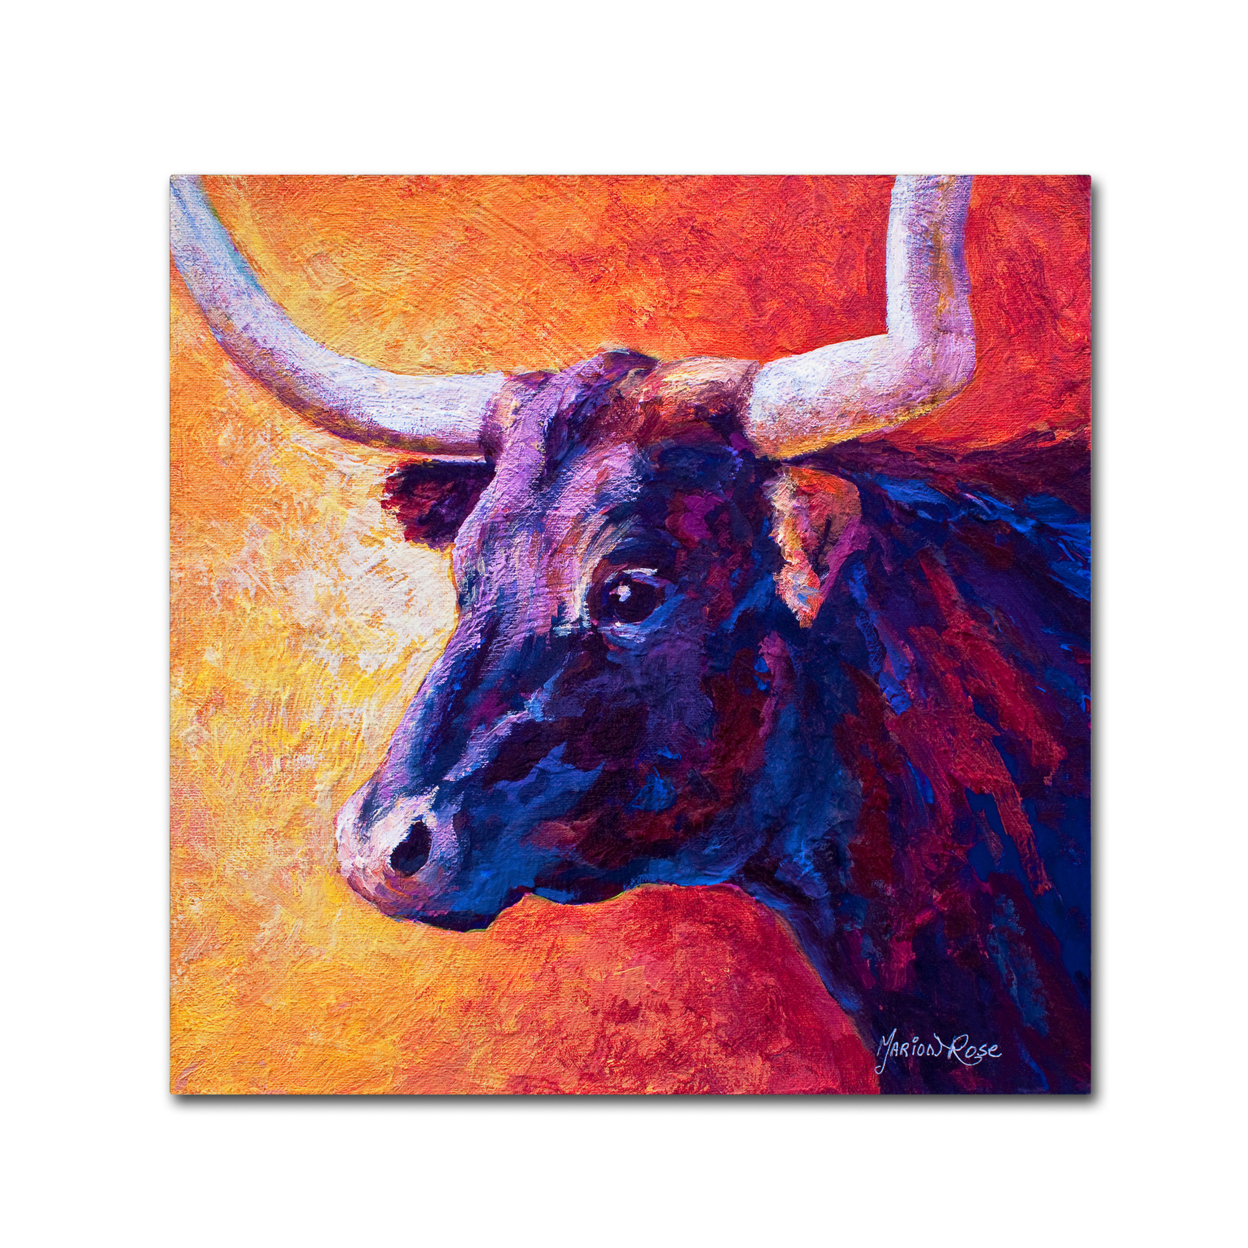 Marion Rose 'Violet Cow' Ready To Hang Canvas Art 14 X 14 Inches Made In USA